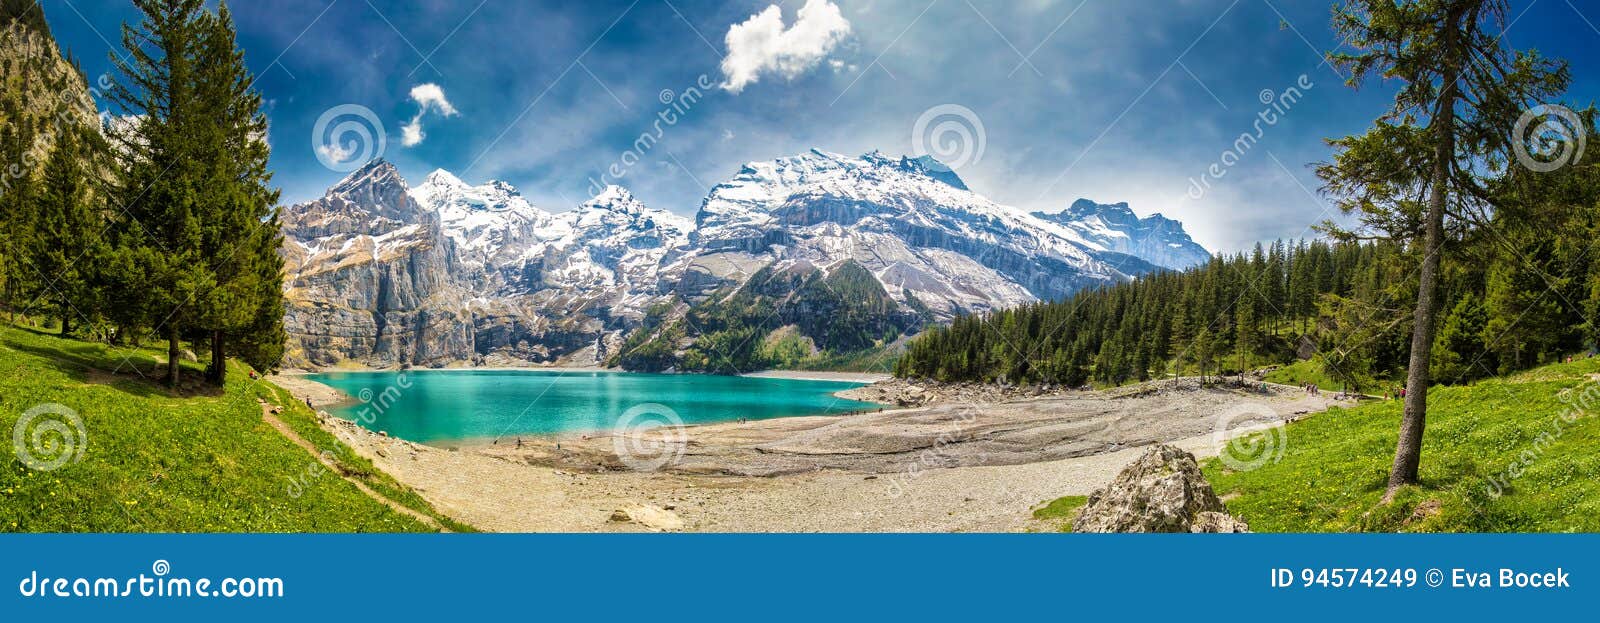 amazing tourquise oeschinnensee with waterfalls, wooden chalet and swiss alps, berner oberland, switzerland